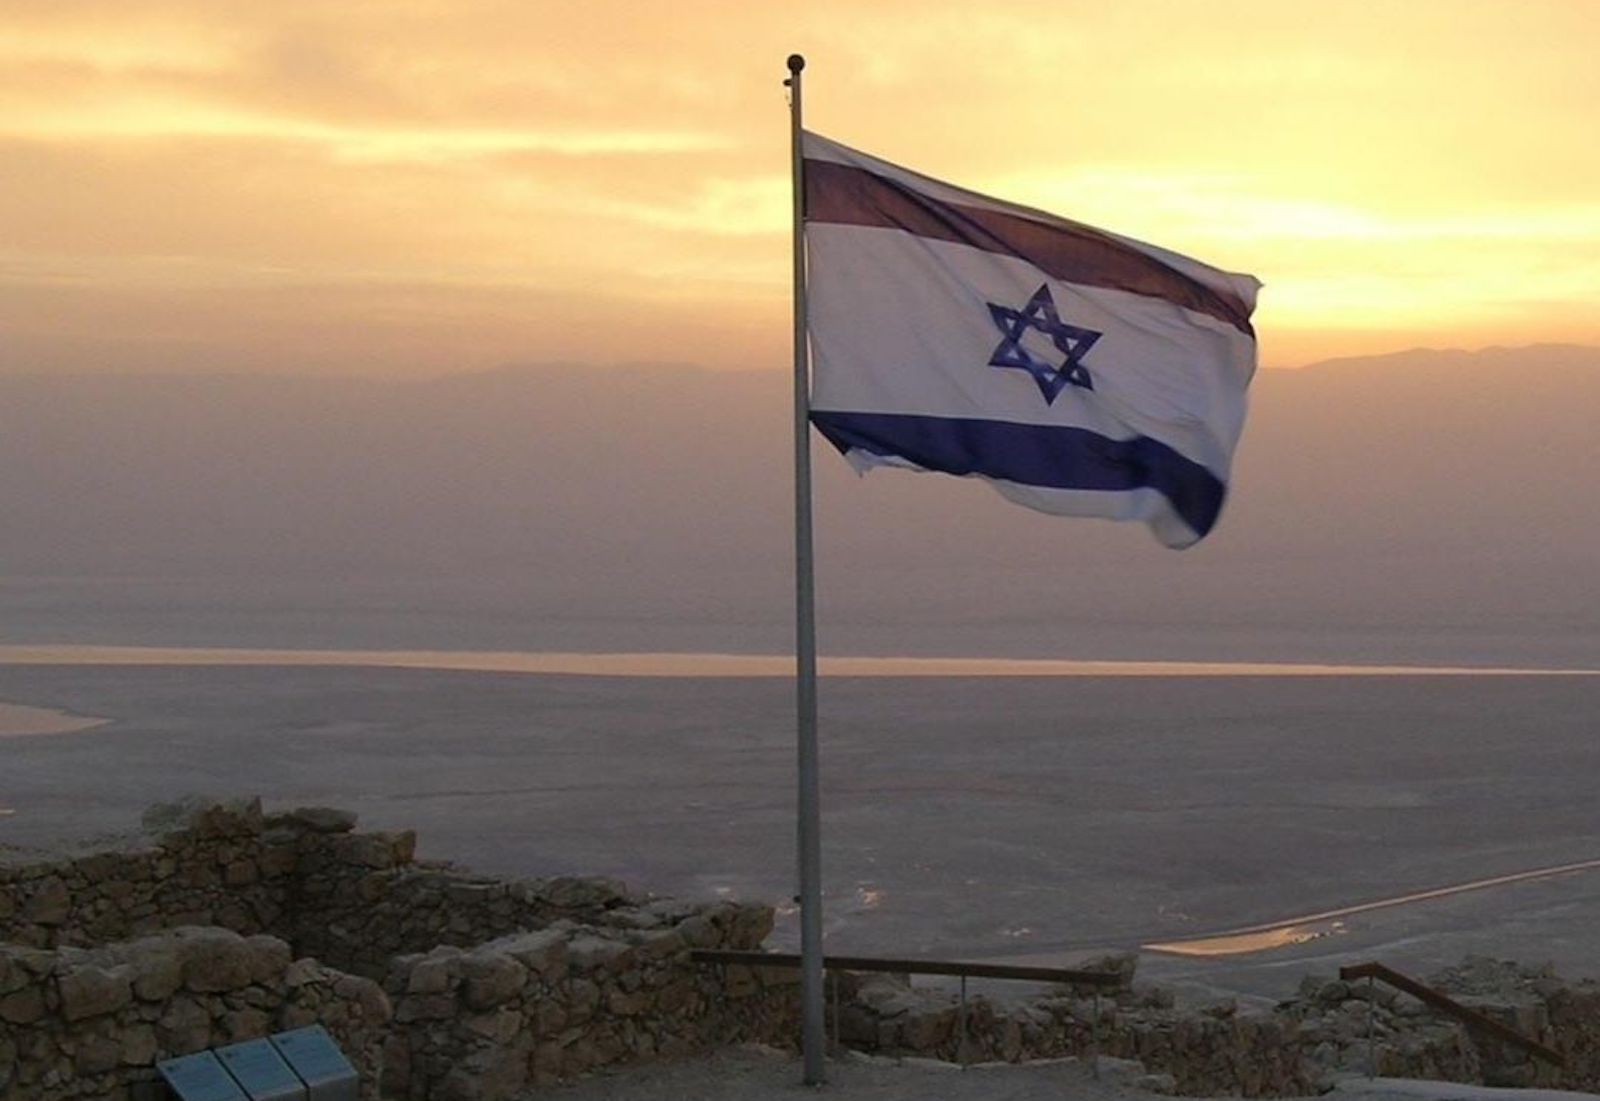 “You’ve probably been lied to” – Common misconceptions about Israel